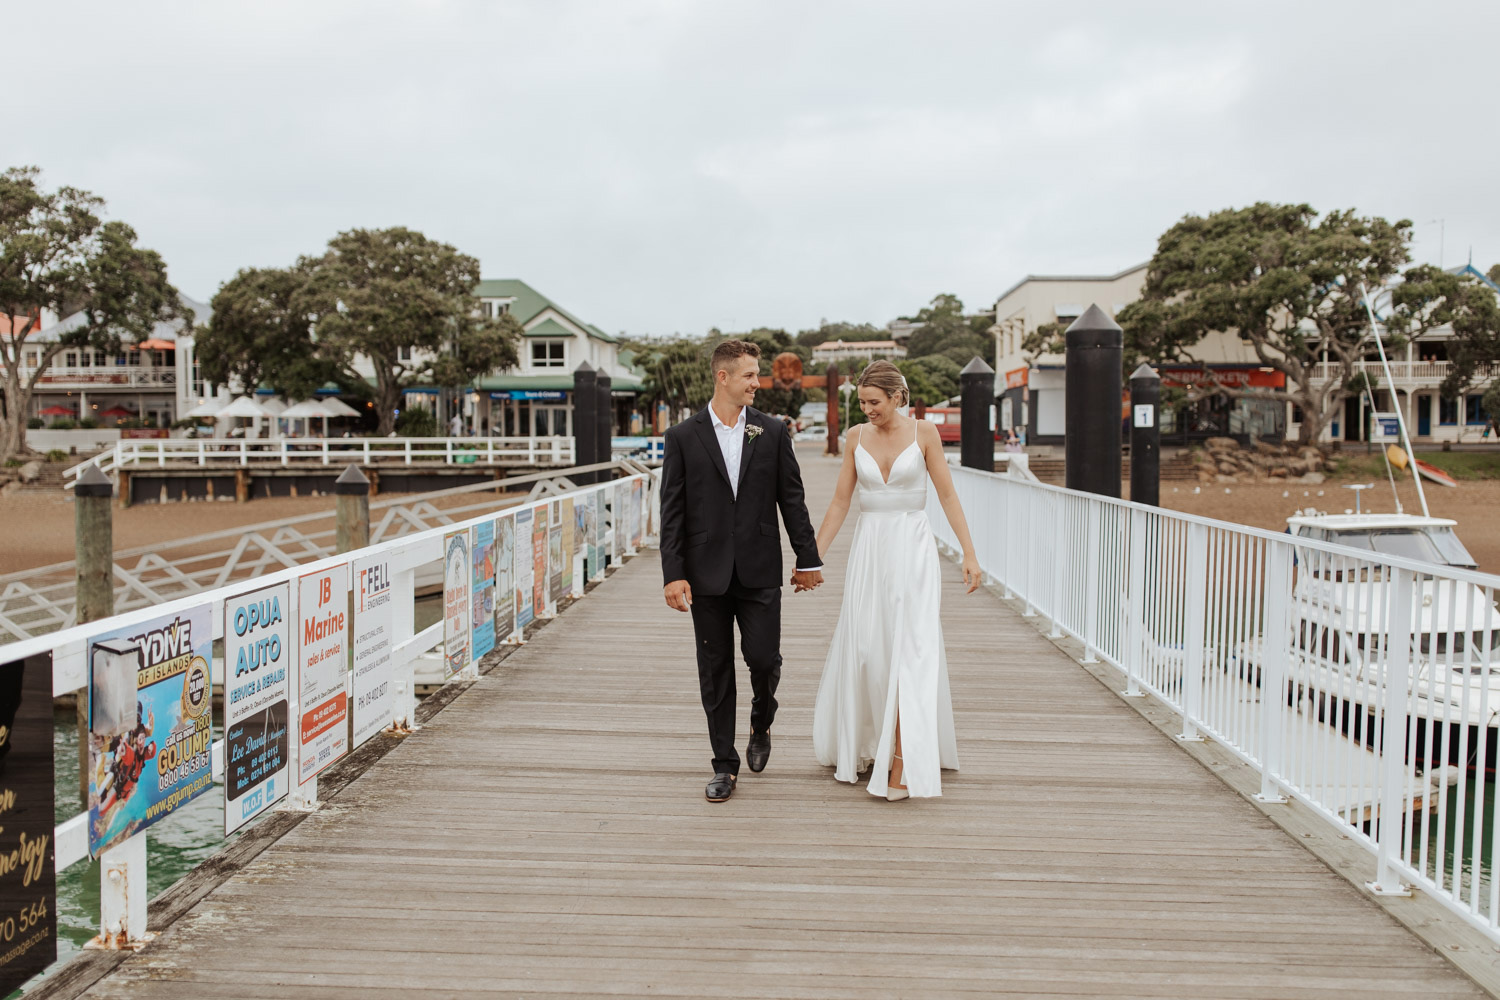 Tayla and Bill New Zealand Elopement